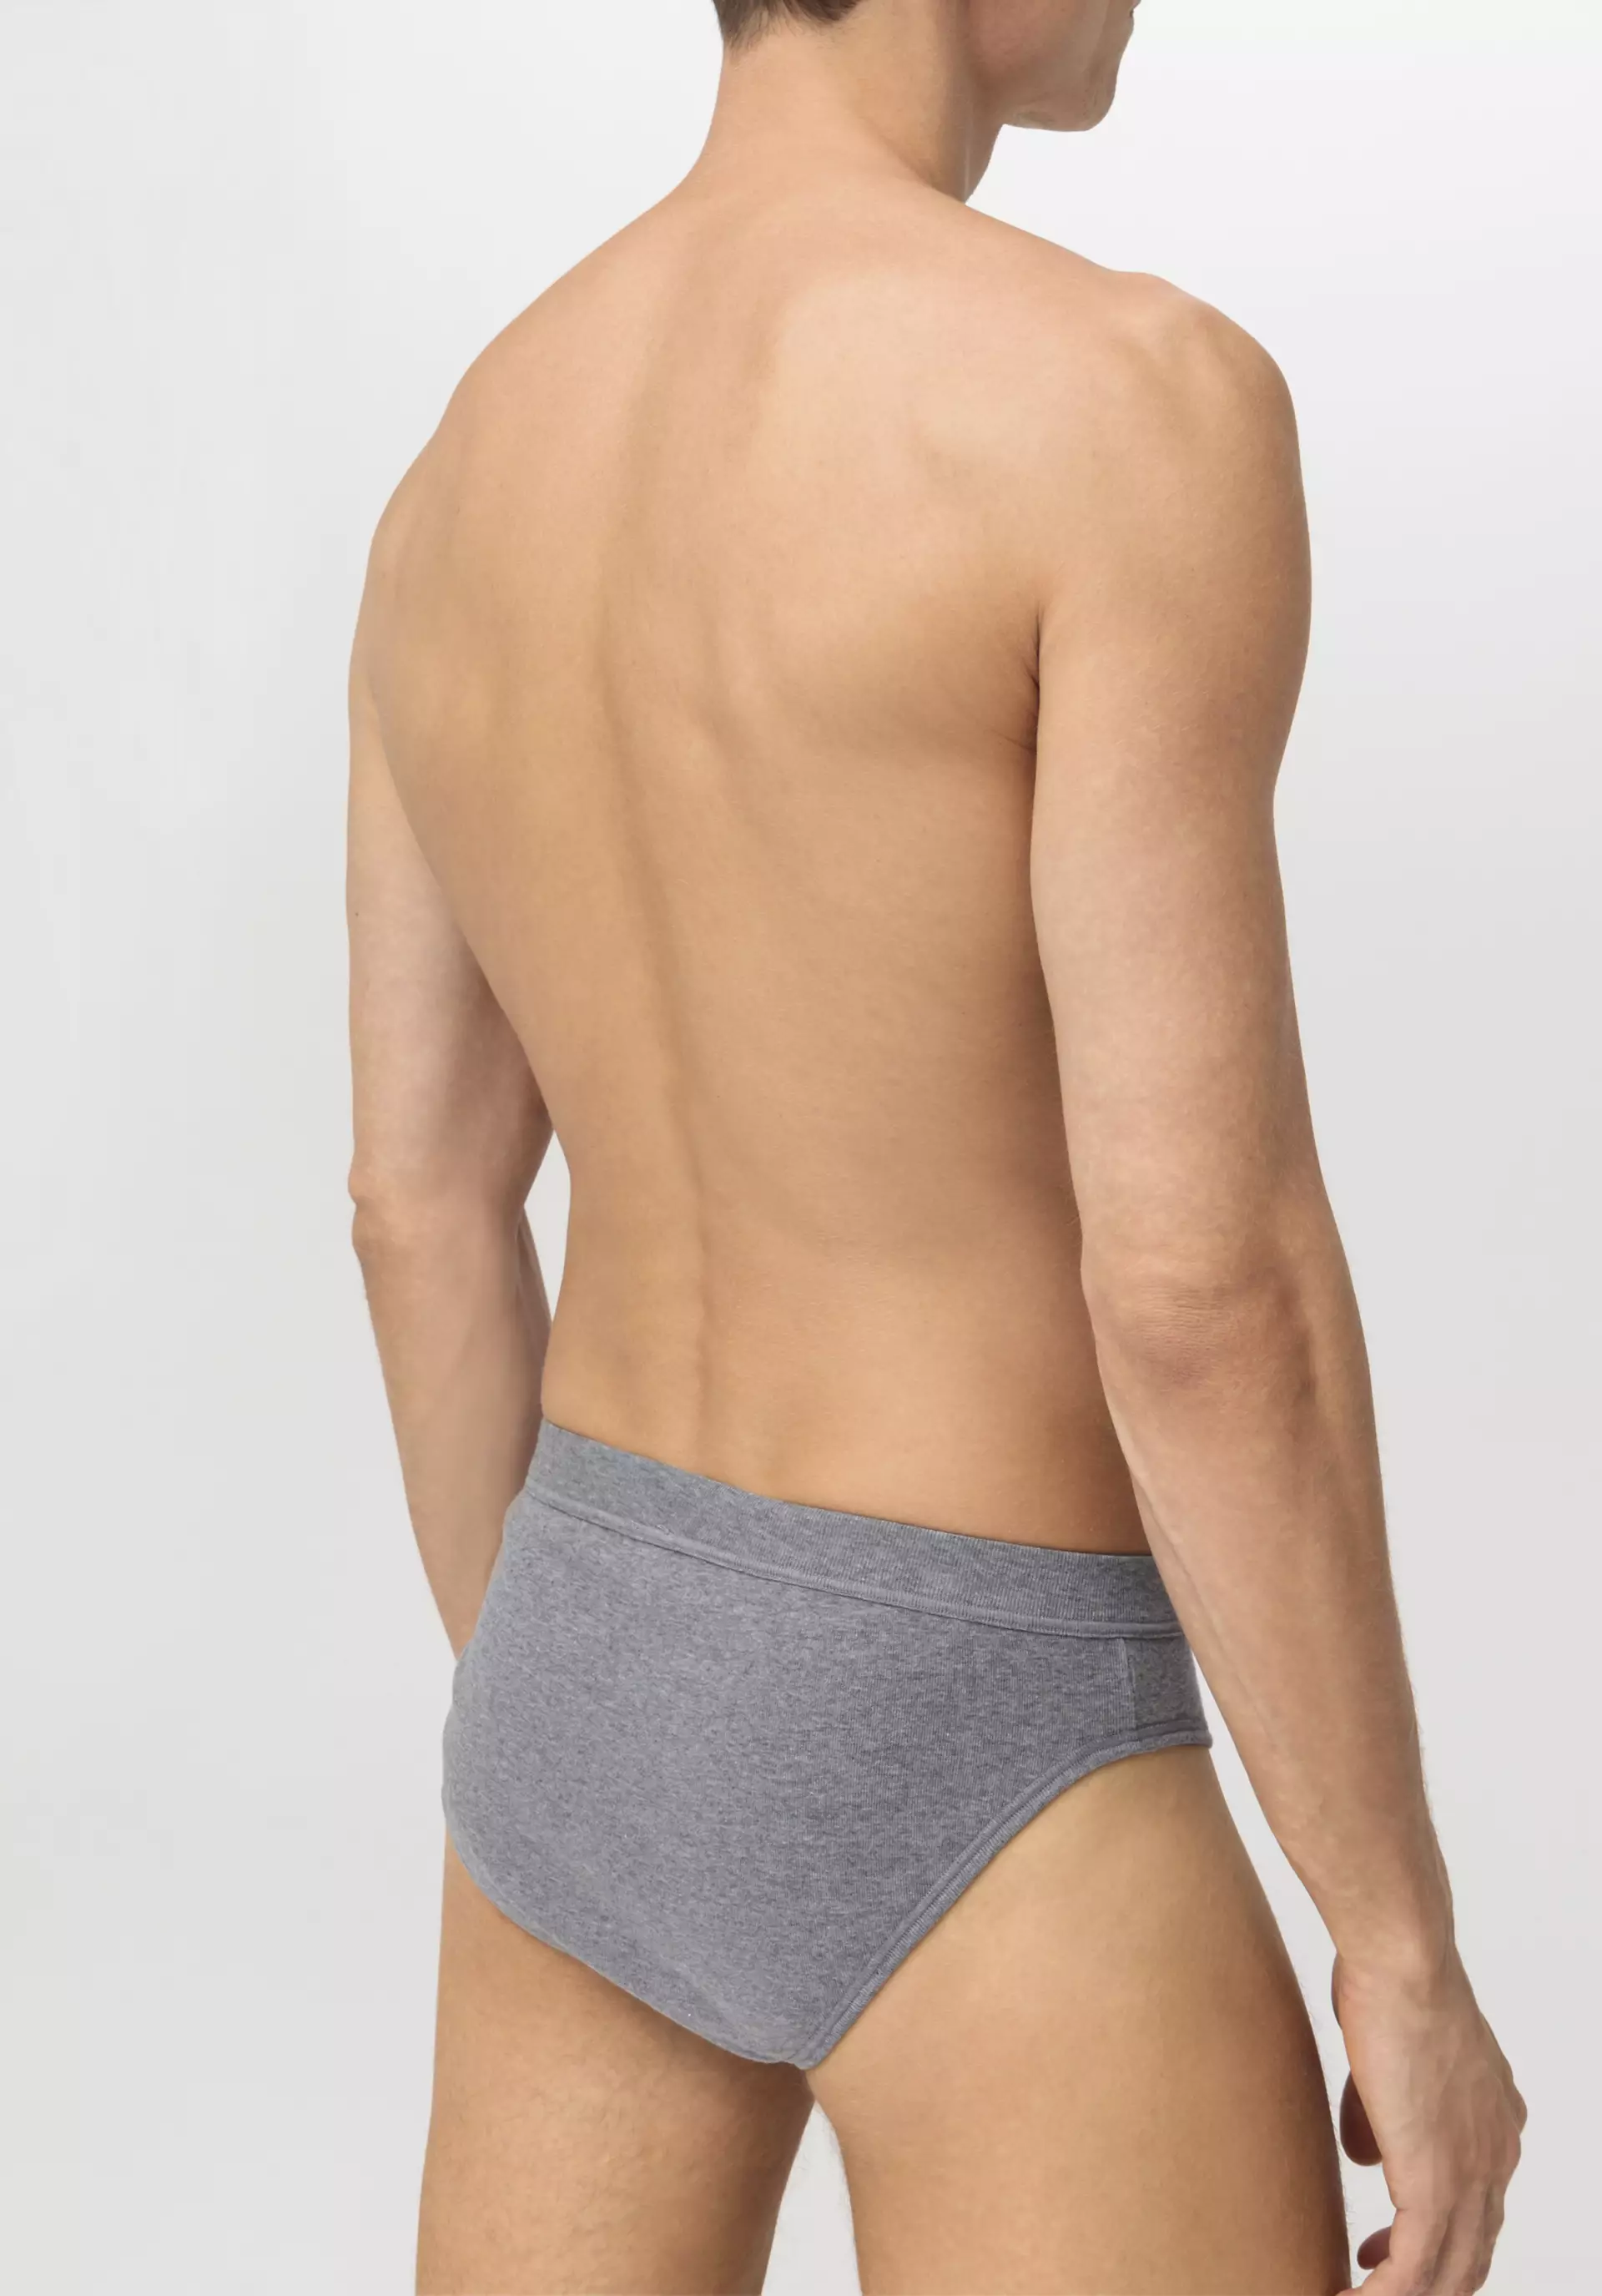 Grey Dark Red Organic cotton french brief | Made to measure